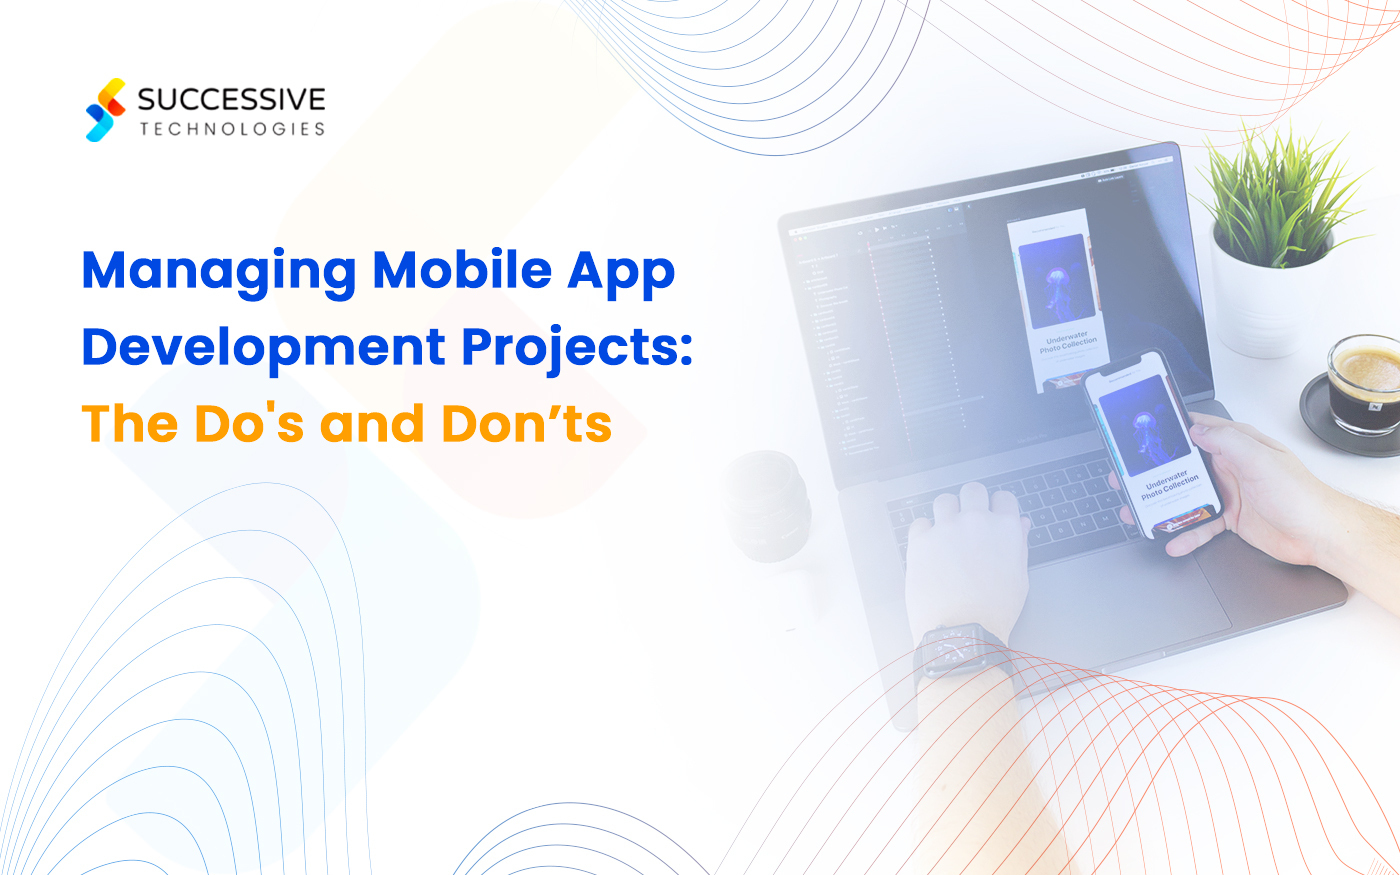 Managing Mobile App Development Projects: The Do’s and Don’ts